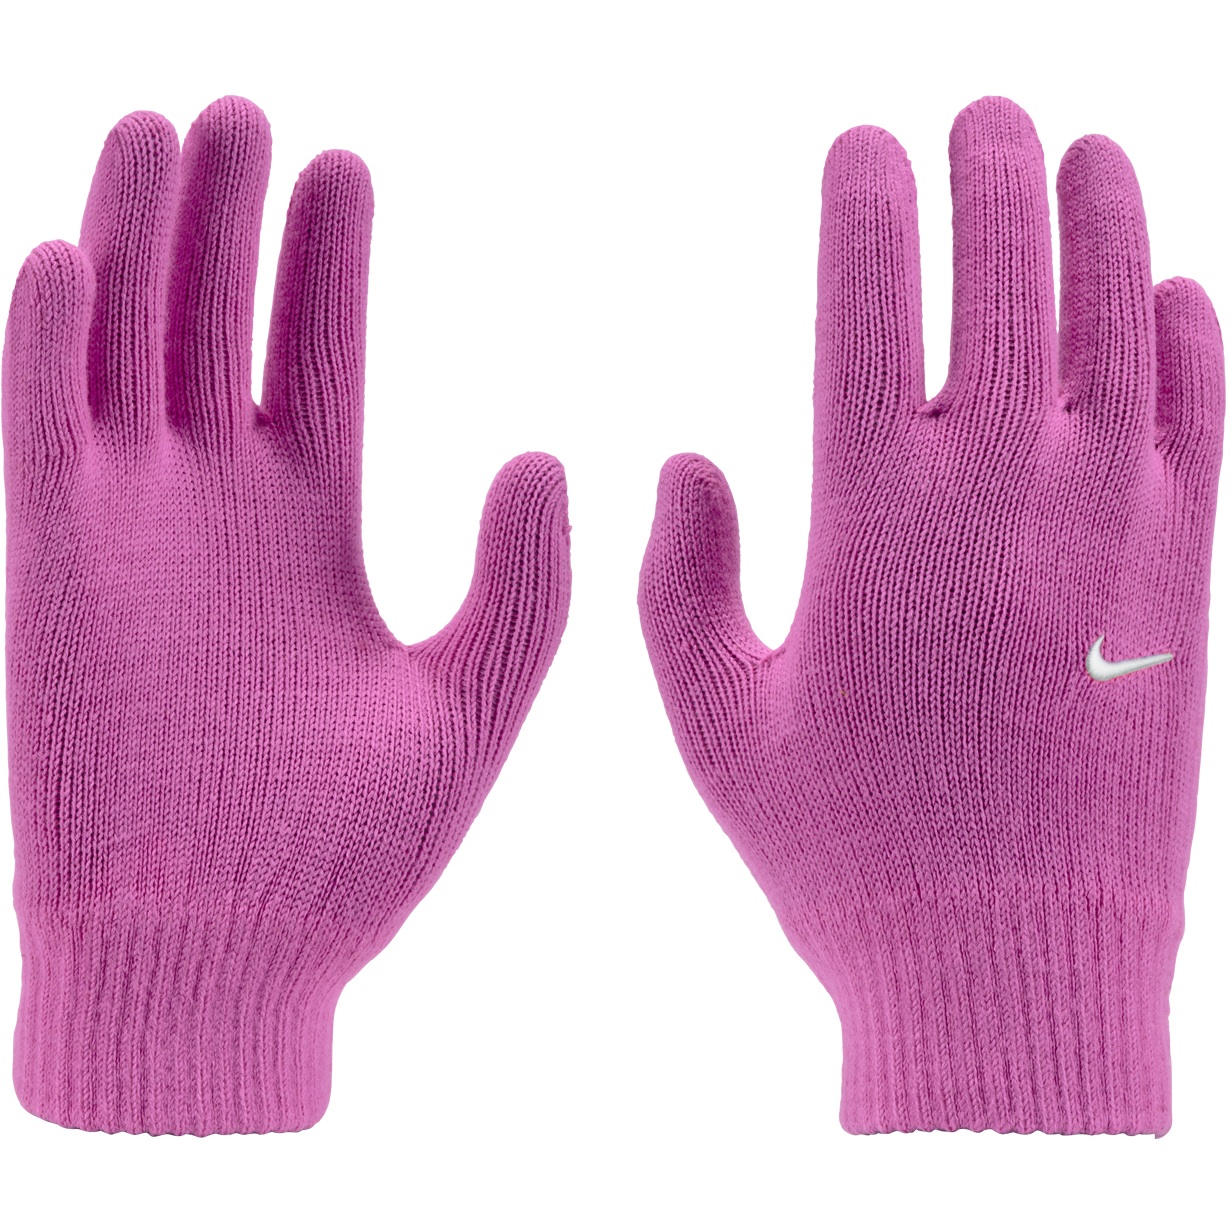 Picture of Nike Youth Knit Swoosh Training Gloves 2.0 - playful pink/white 627